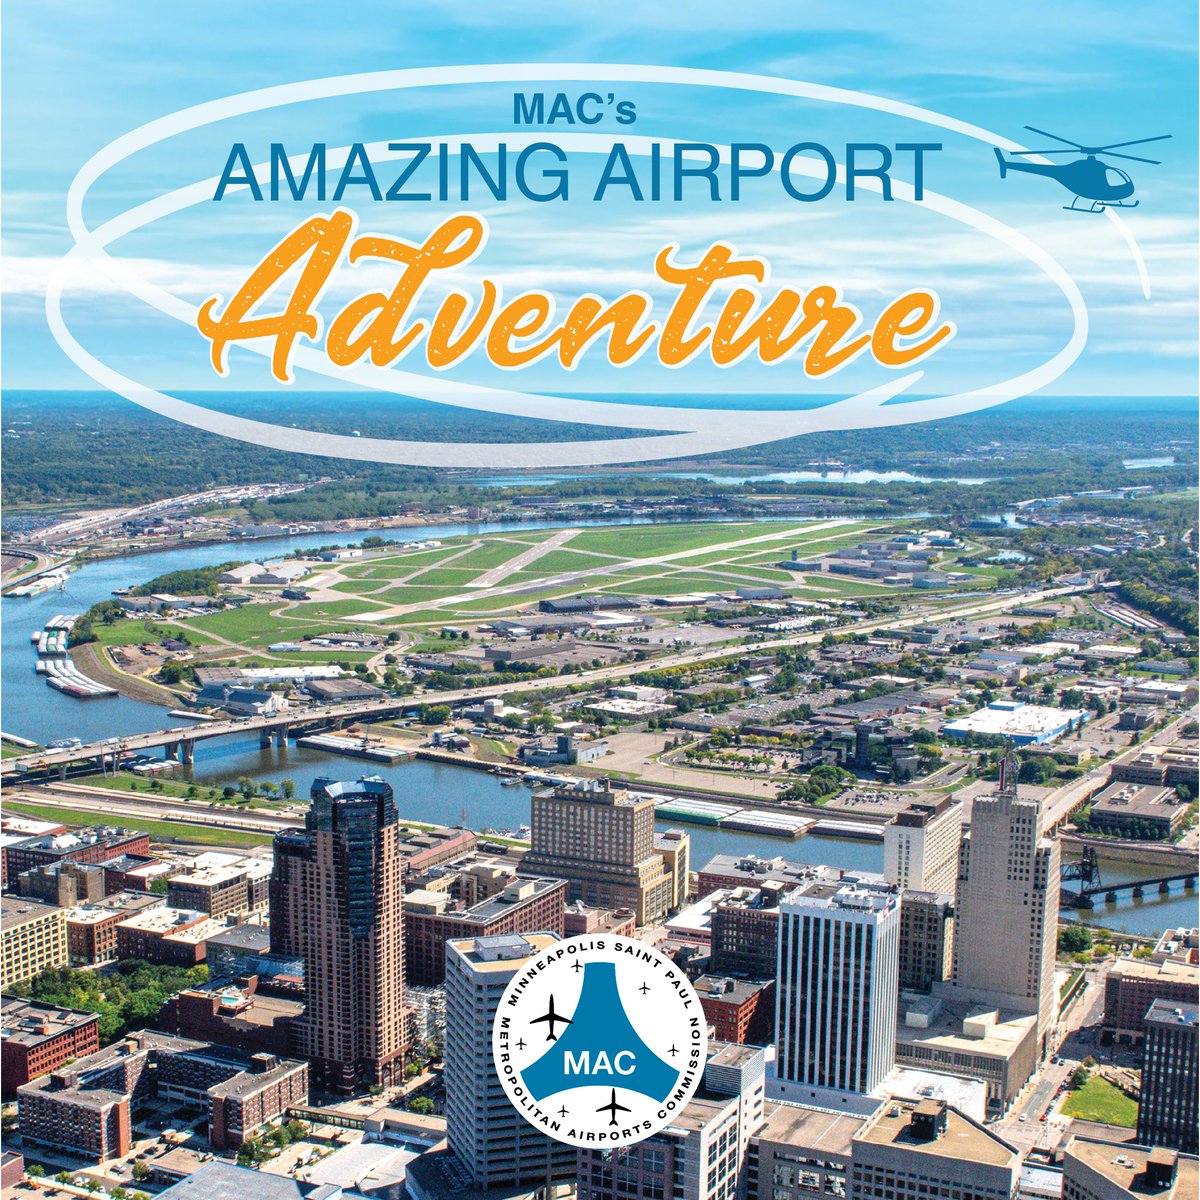 Enter to win an Amazing Airport Adventure from the Metropolitan Airports Commission: VIP airfield tour, a helicopter flight over St. Paul, and dinner for two! Enter to win now! ow.ly/C8hi50Ry2ut